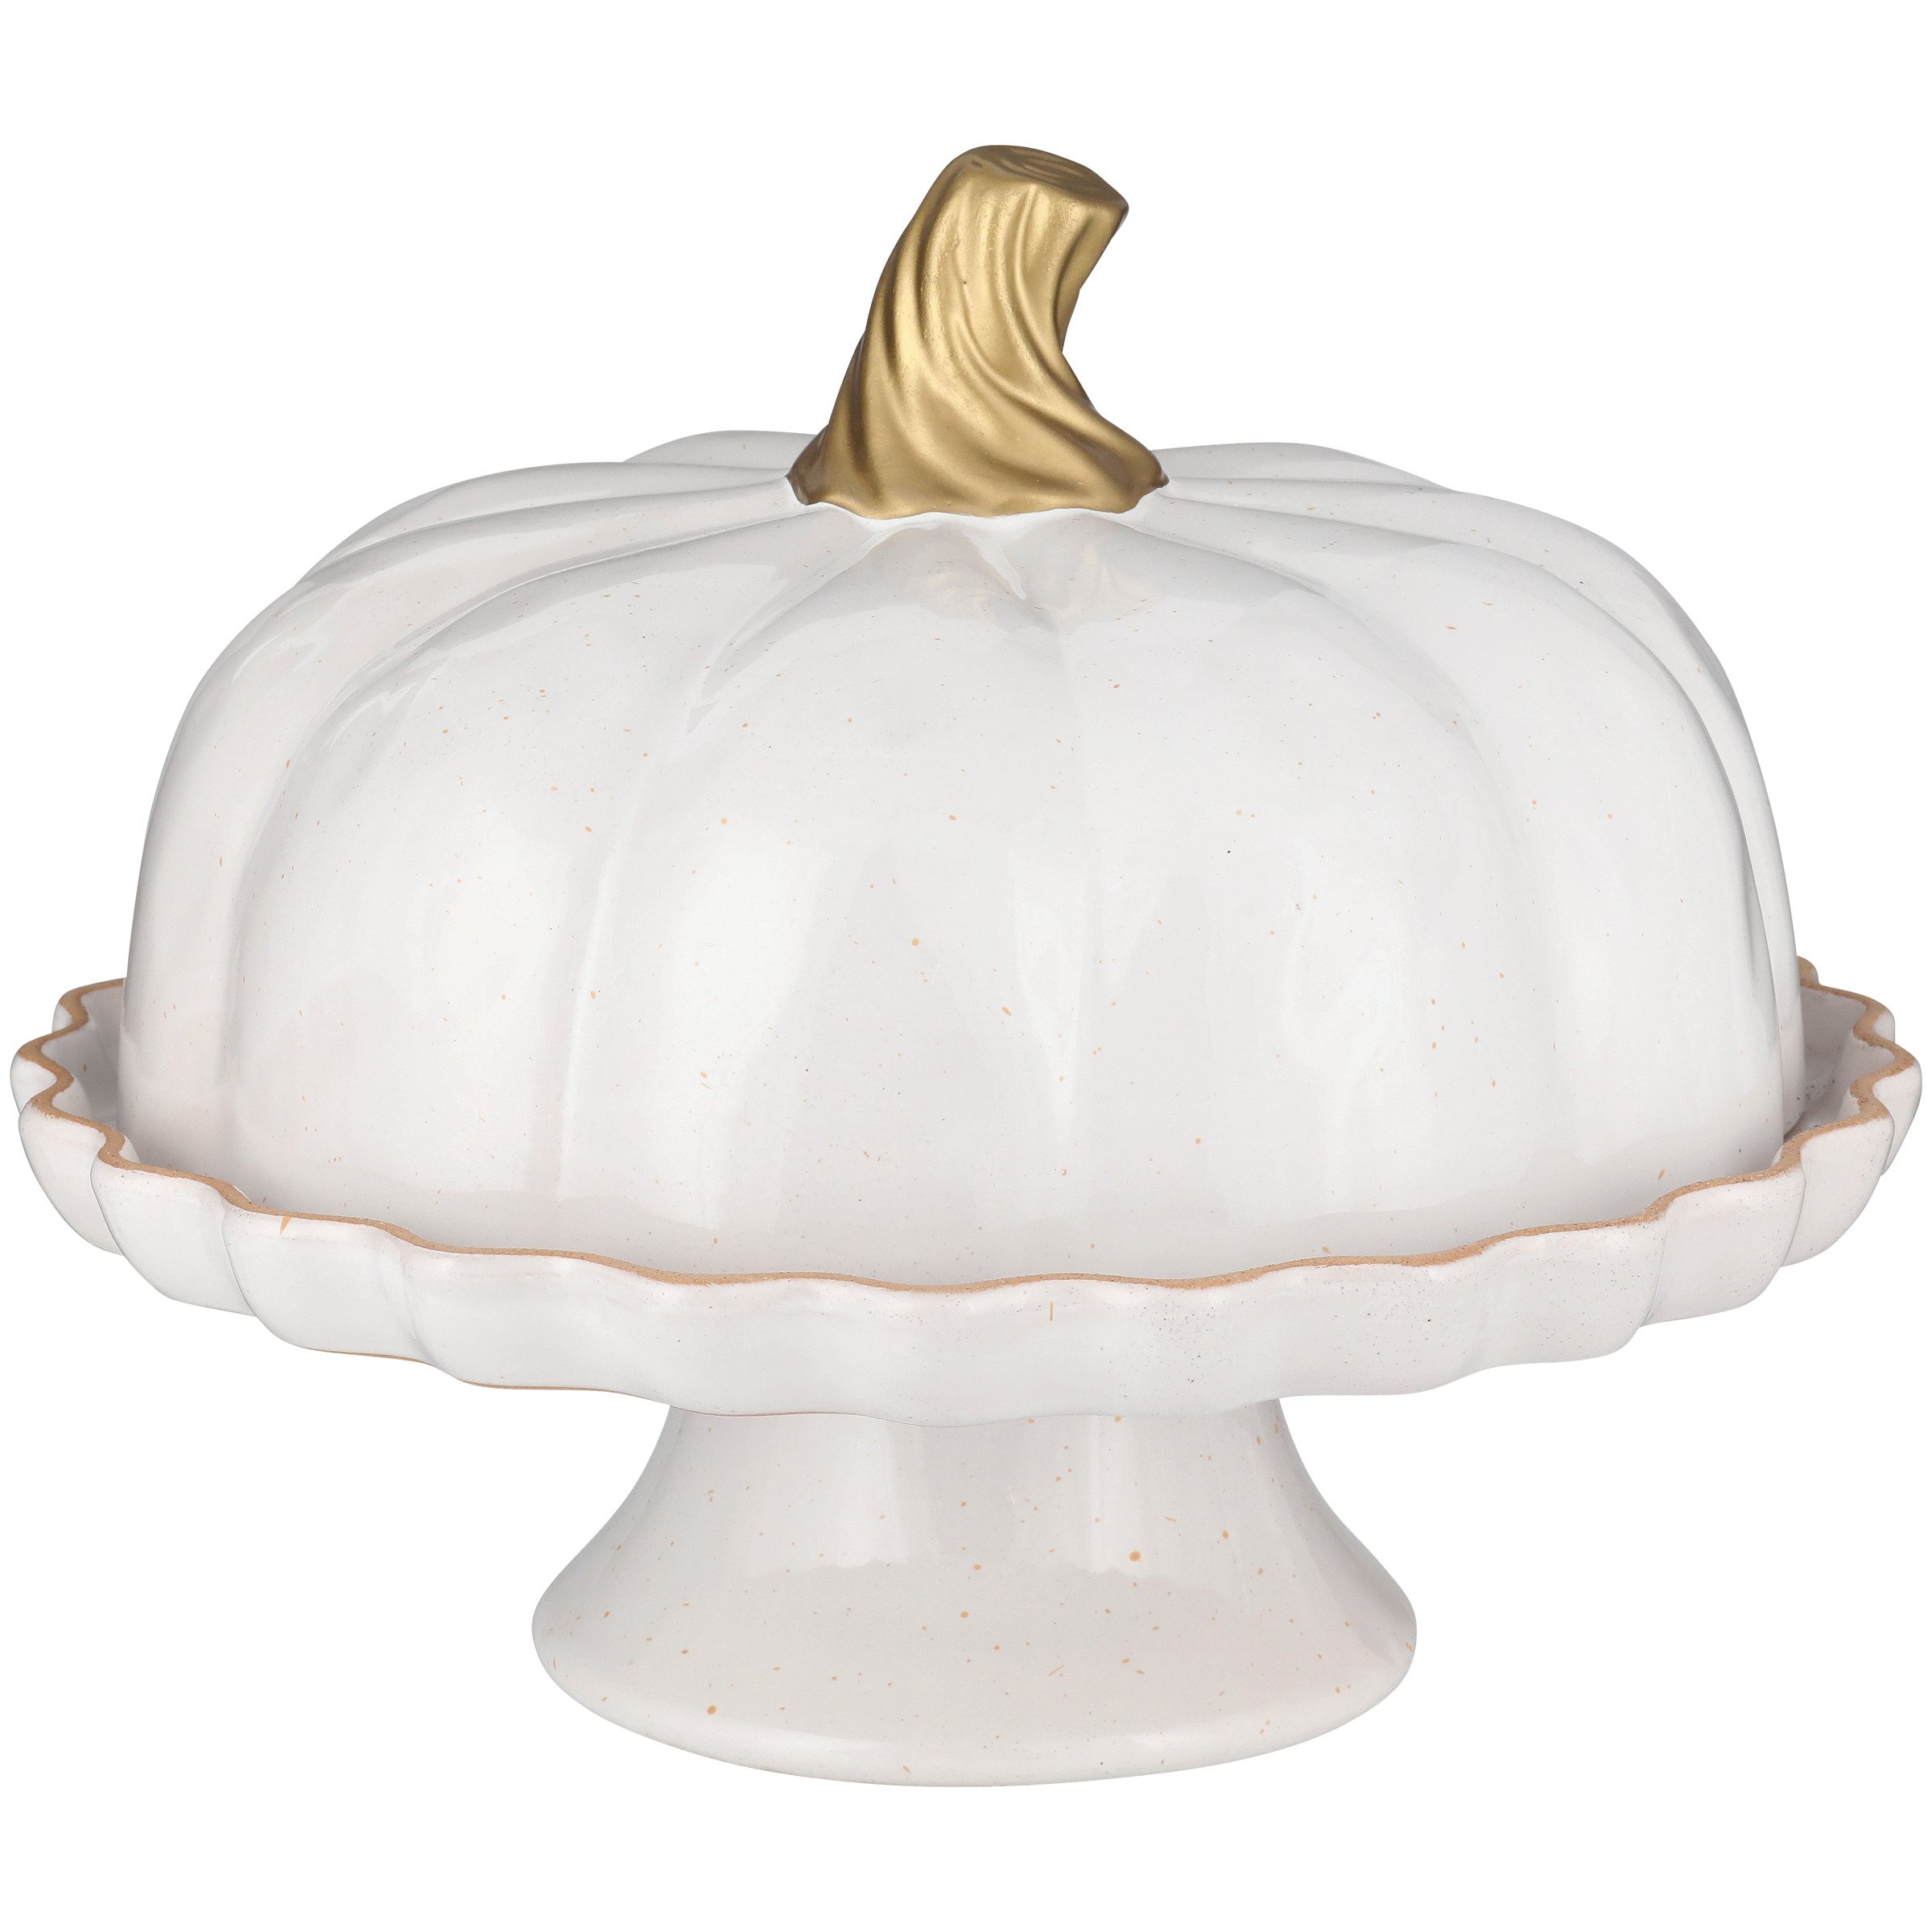 Destination Holiday Stoneware Cake Stand with Pumpkin Lid - Shop ...